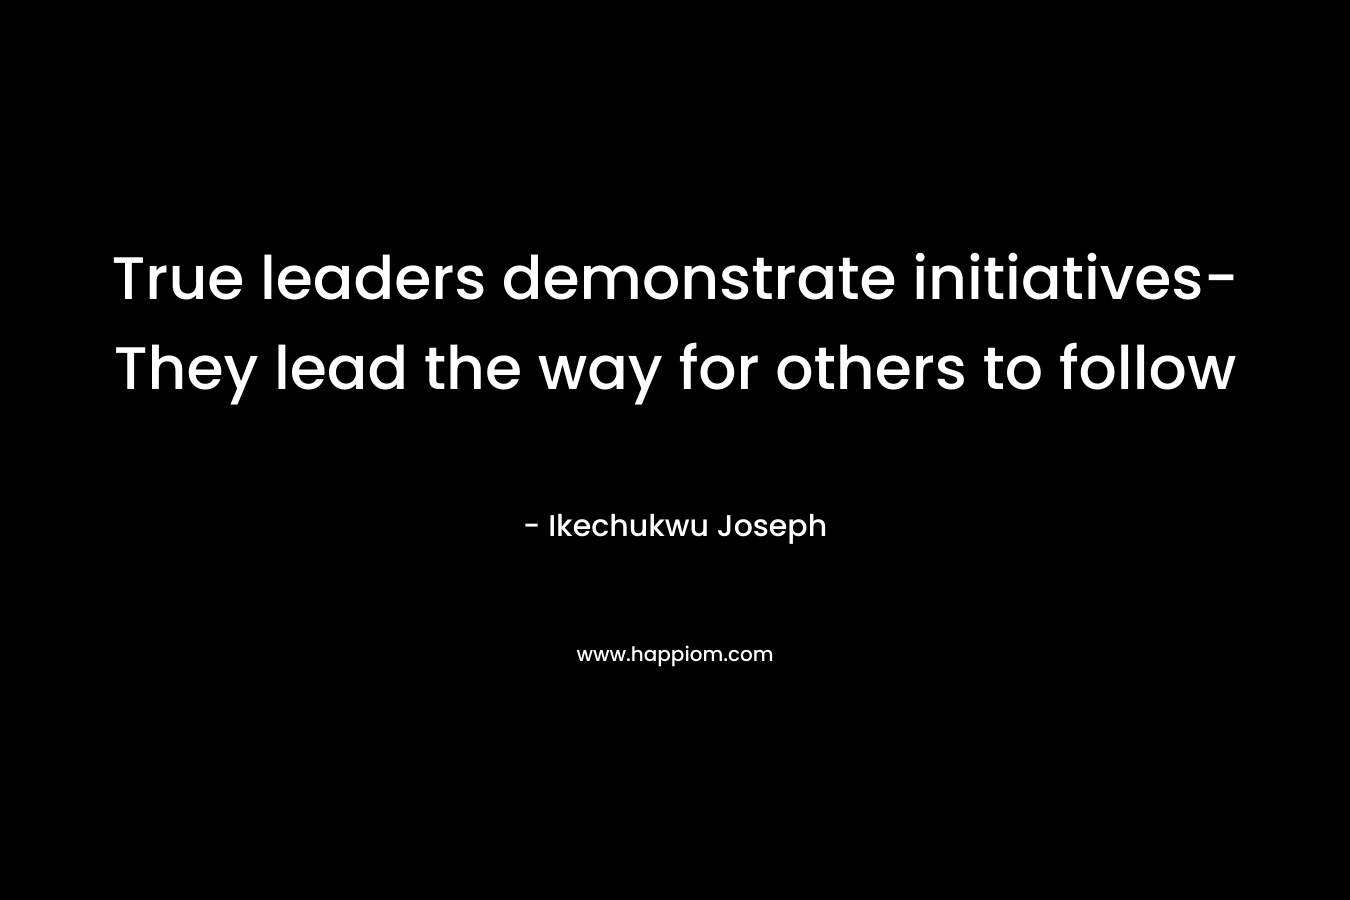 True leaders demonstrate initiatives-They lead the way for others to follow